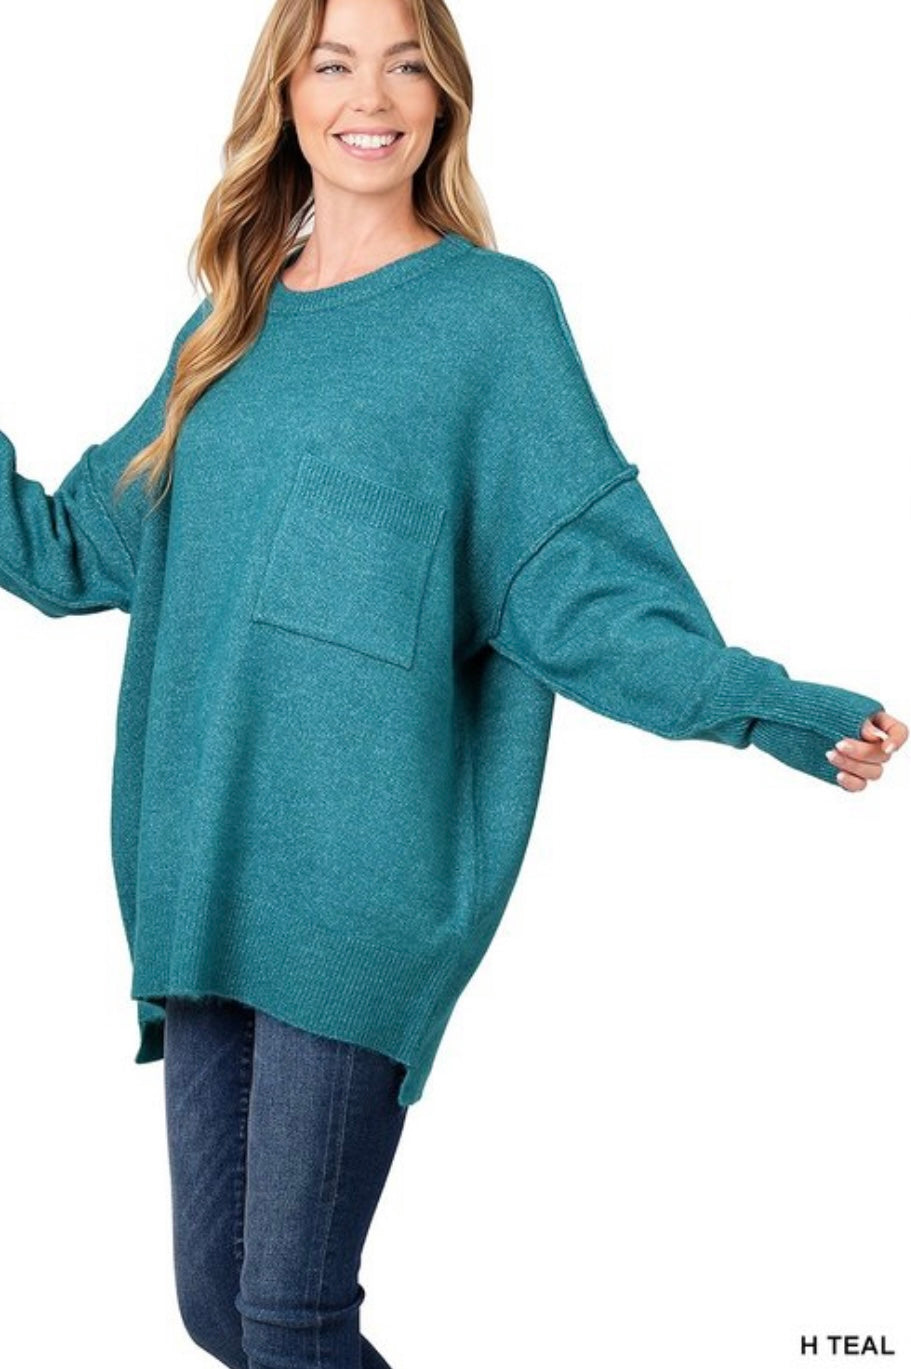 Teal Oversized Sweater